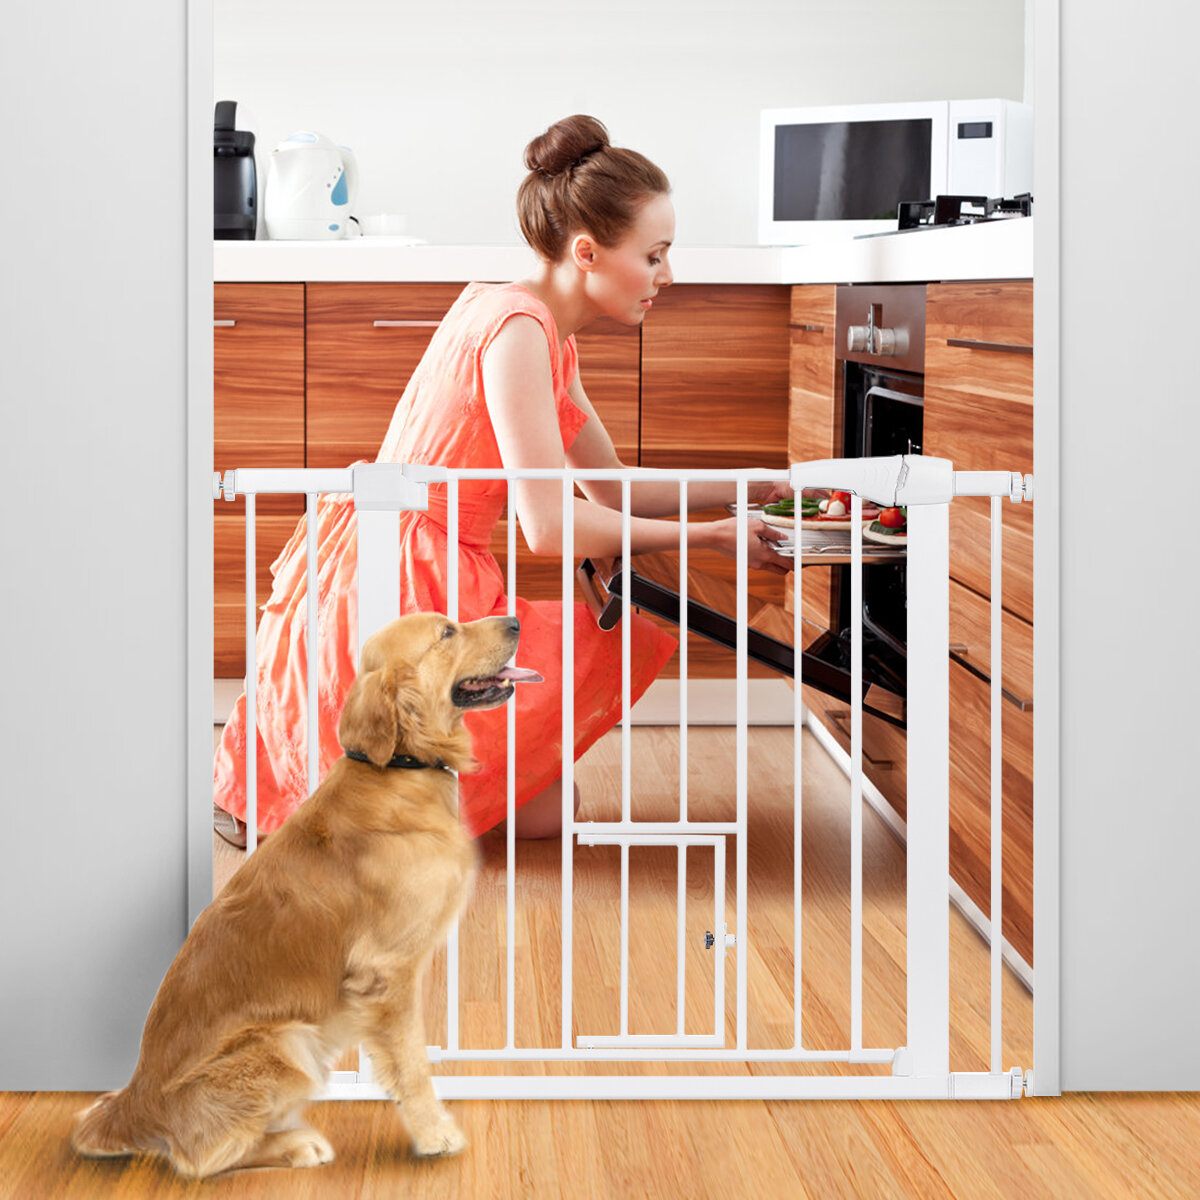 

Comomy Extra Wide Pet Gate for Dog Cat Animal, Baby Gate Fence Pens with Swing Door Kids Play Gate 30" Tall Doggie Gate